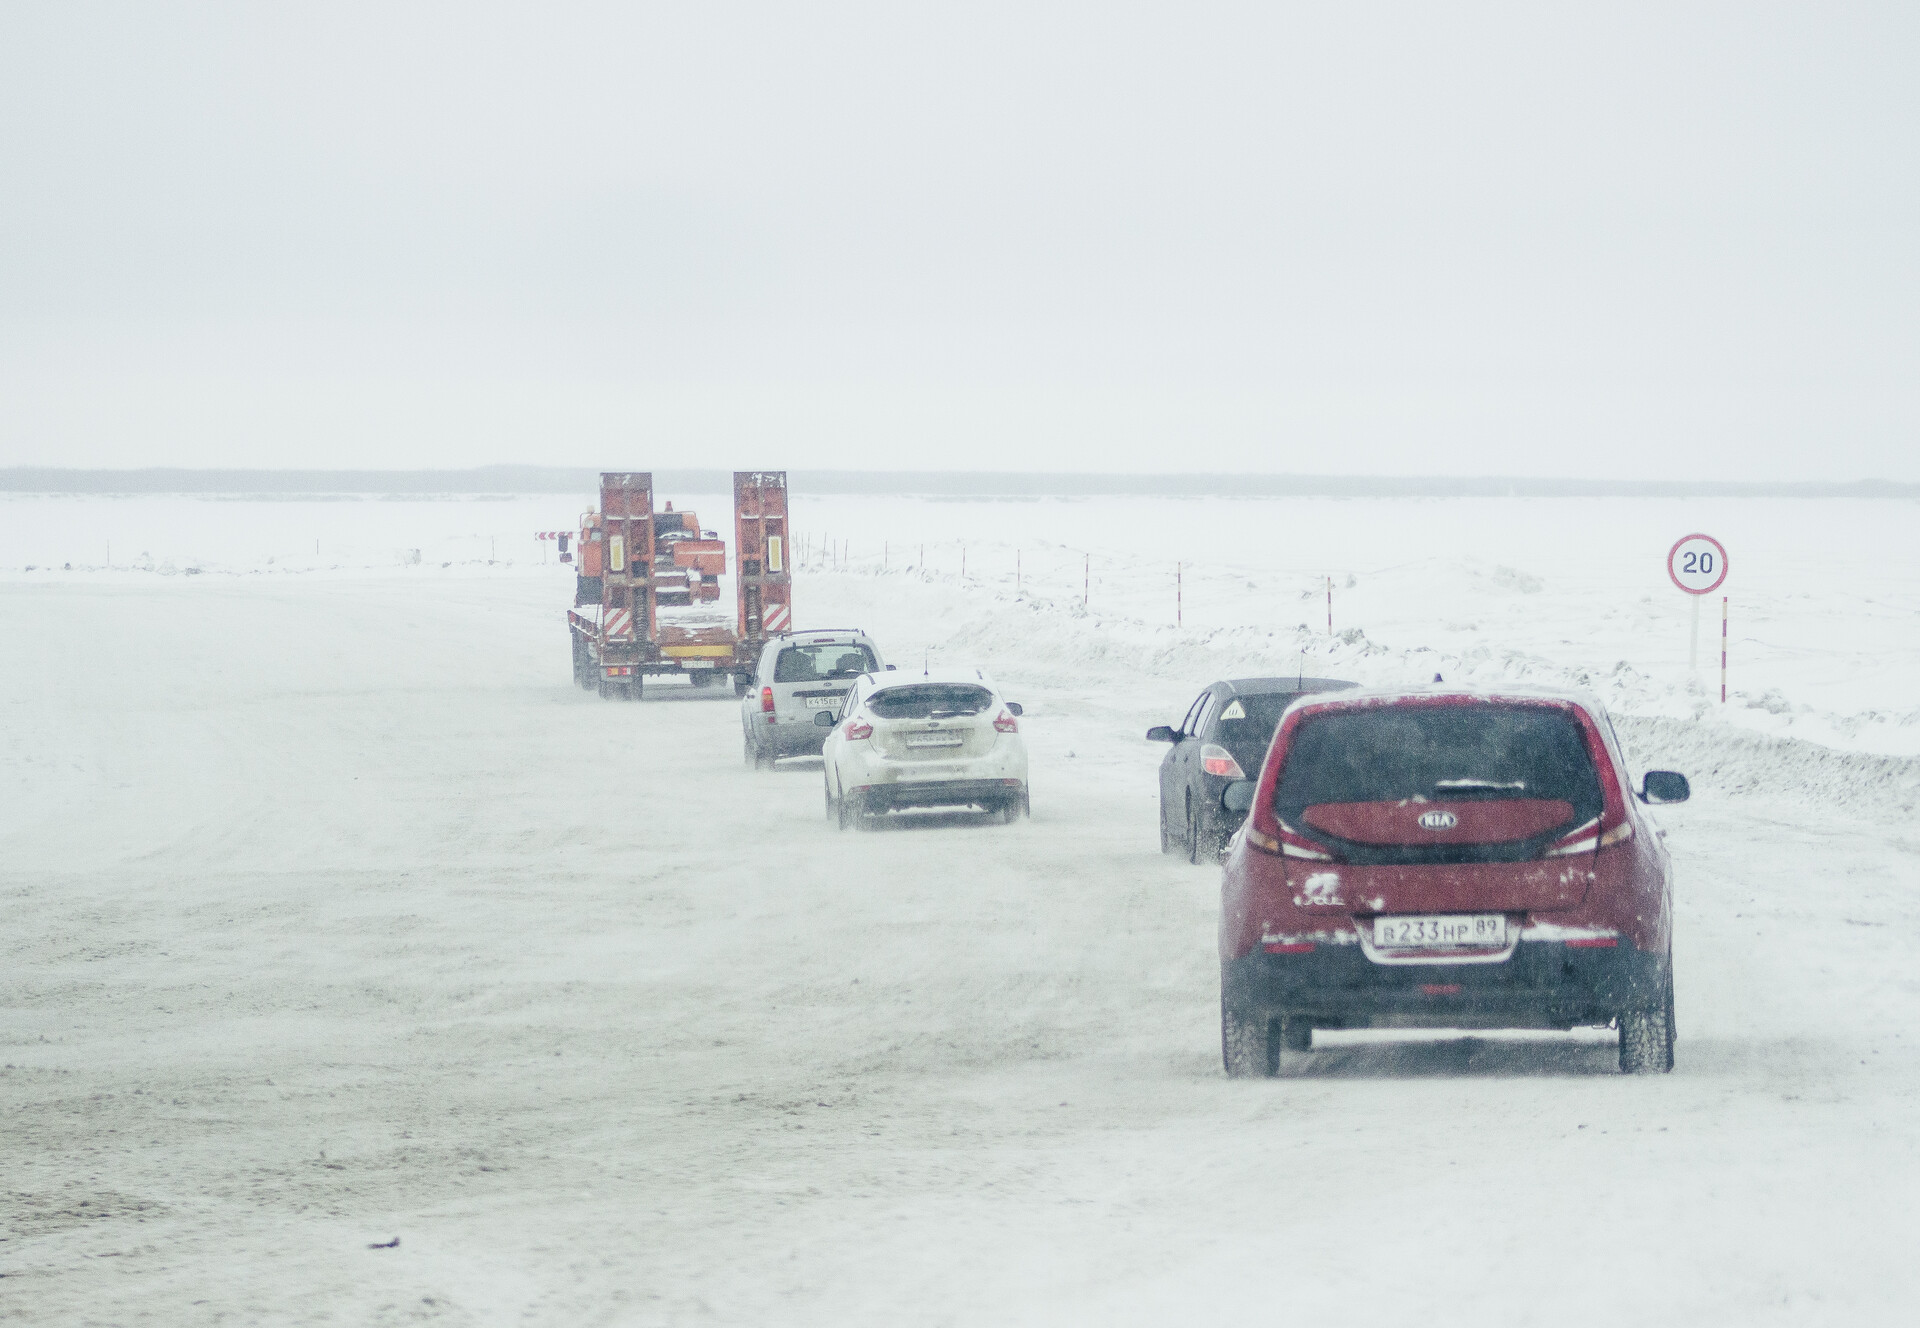 The ice road between the cities.